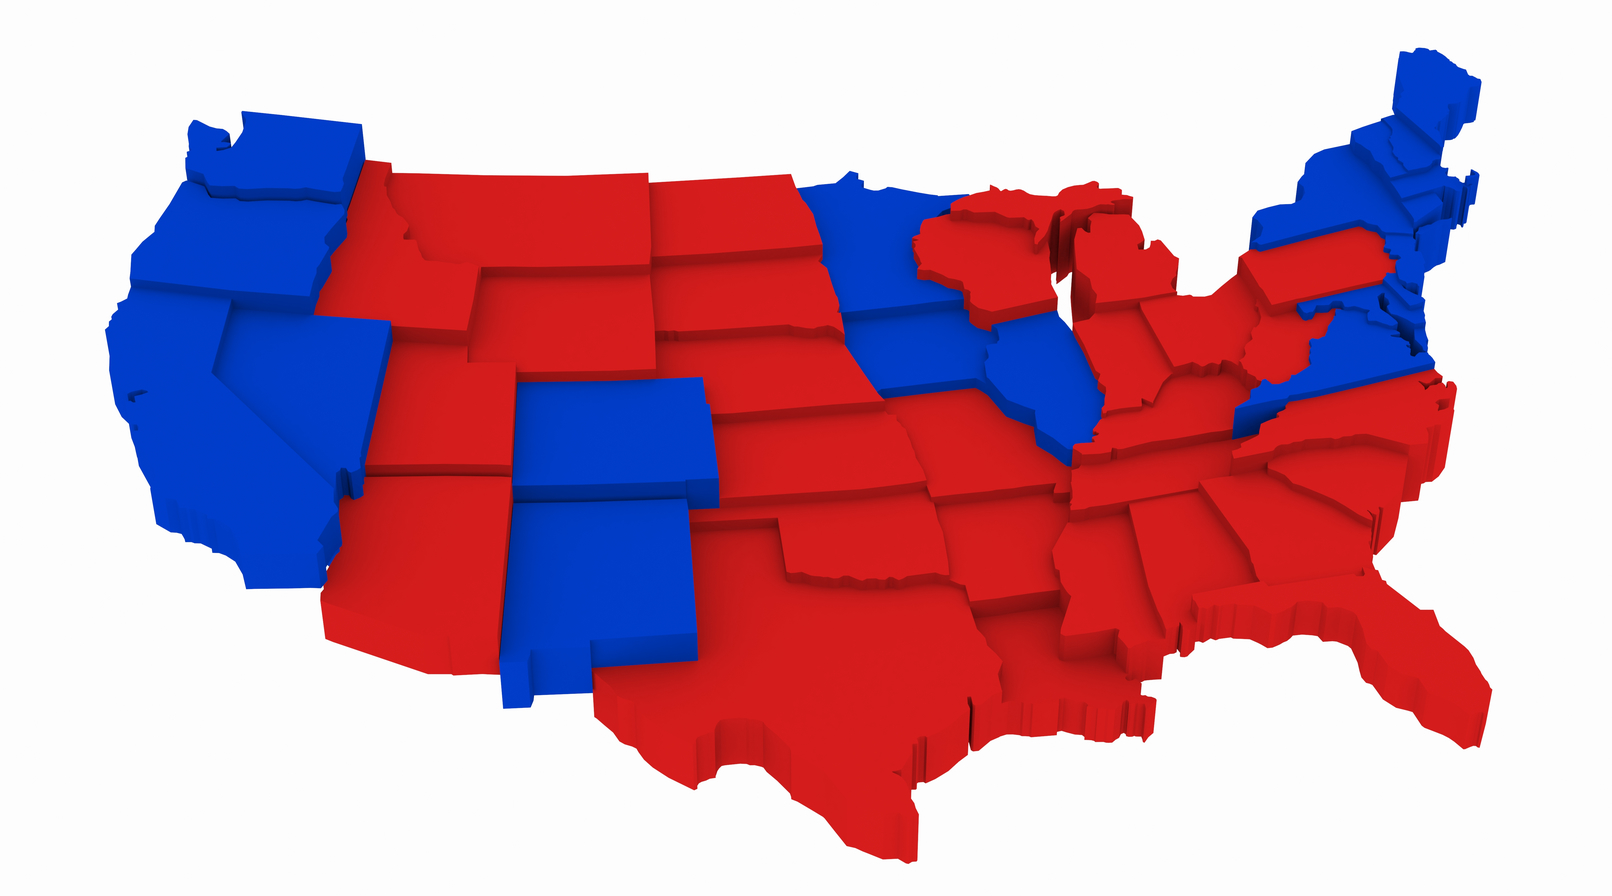 Coalition of Law Firms, Professors Files Several Lawsuits Alleging Electoral College Is Unconstitutional